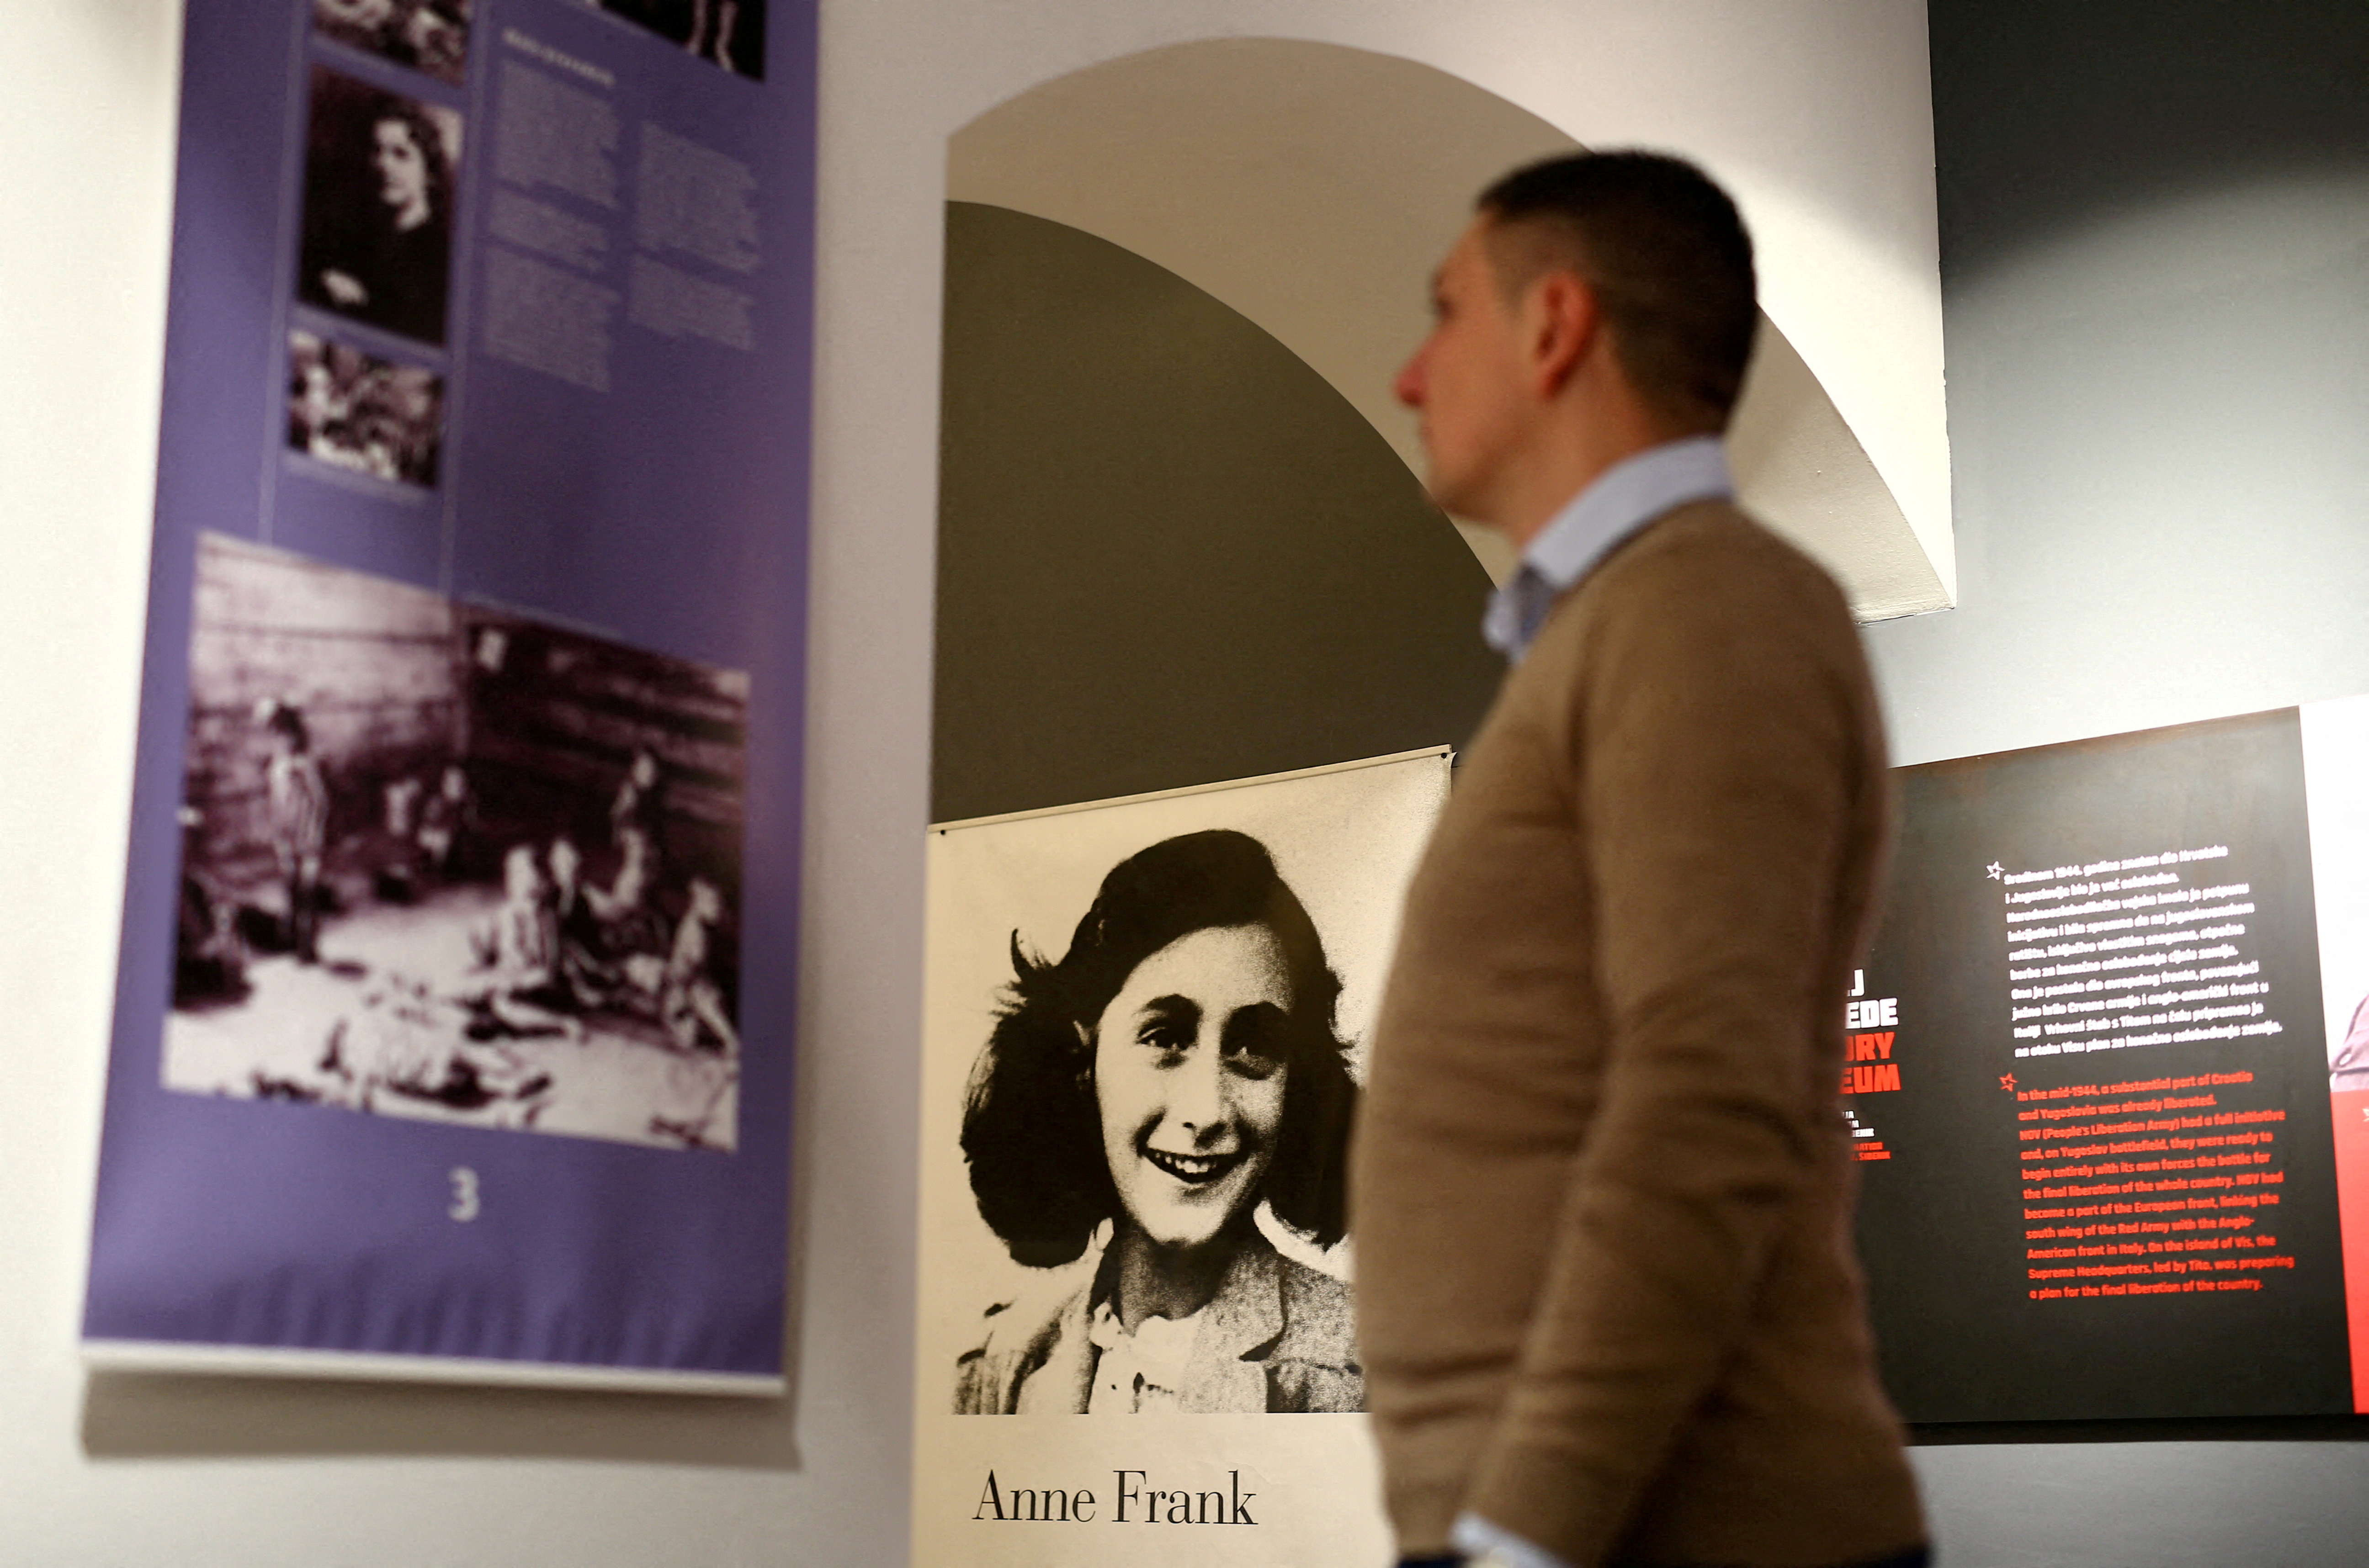 A man looks at an exhibition about Anne Frank at the Victory museum in Sibenik